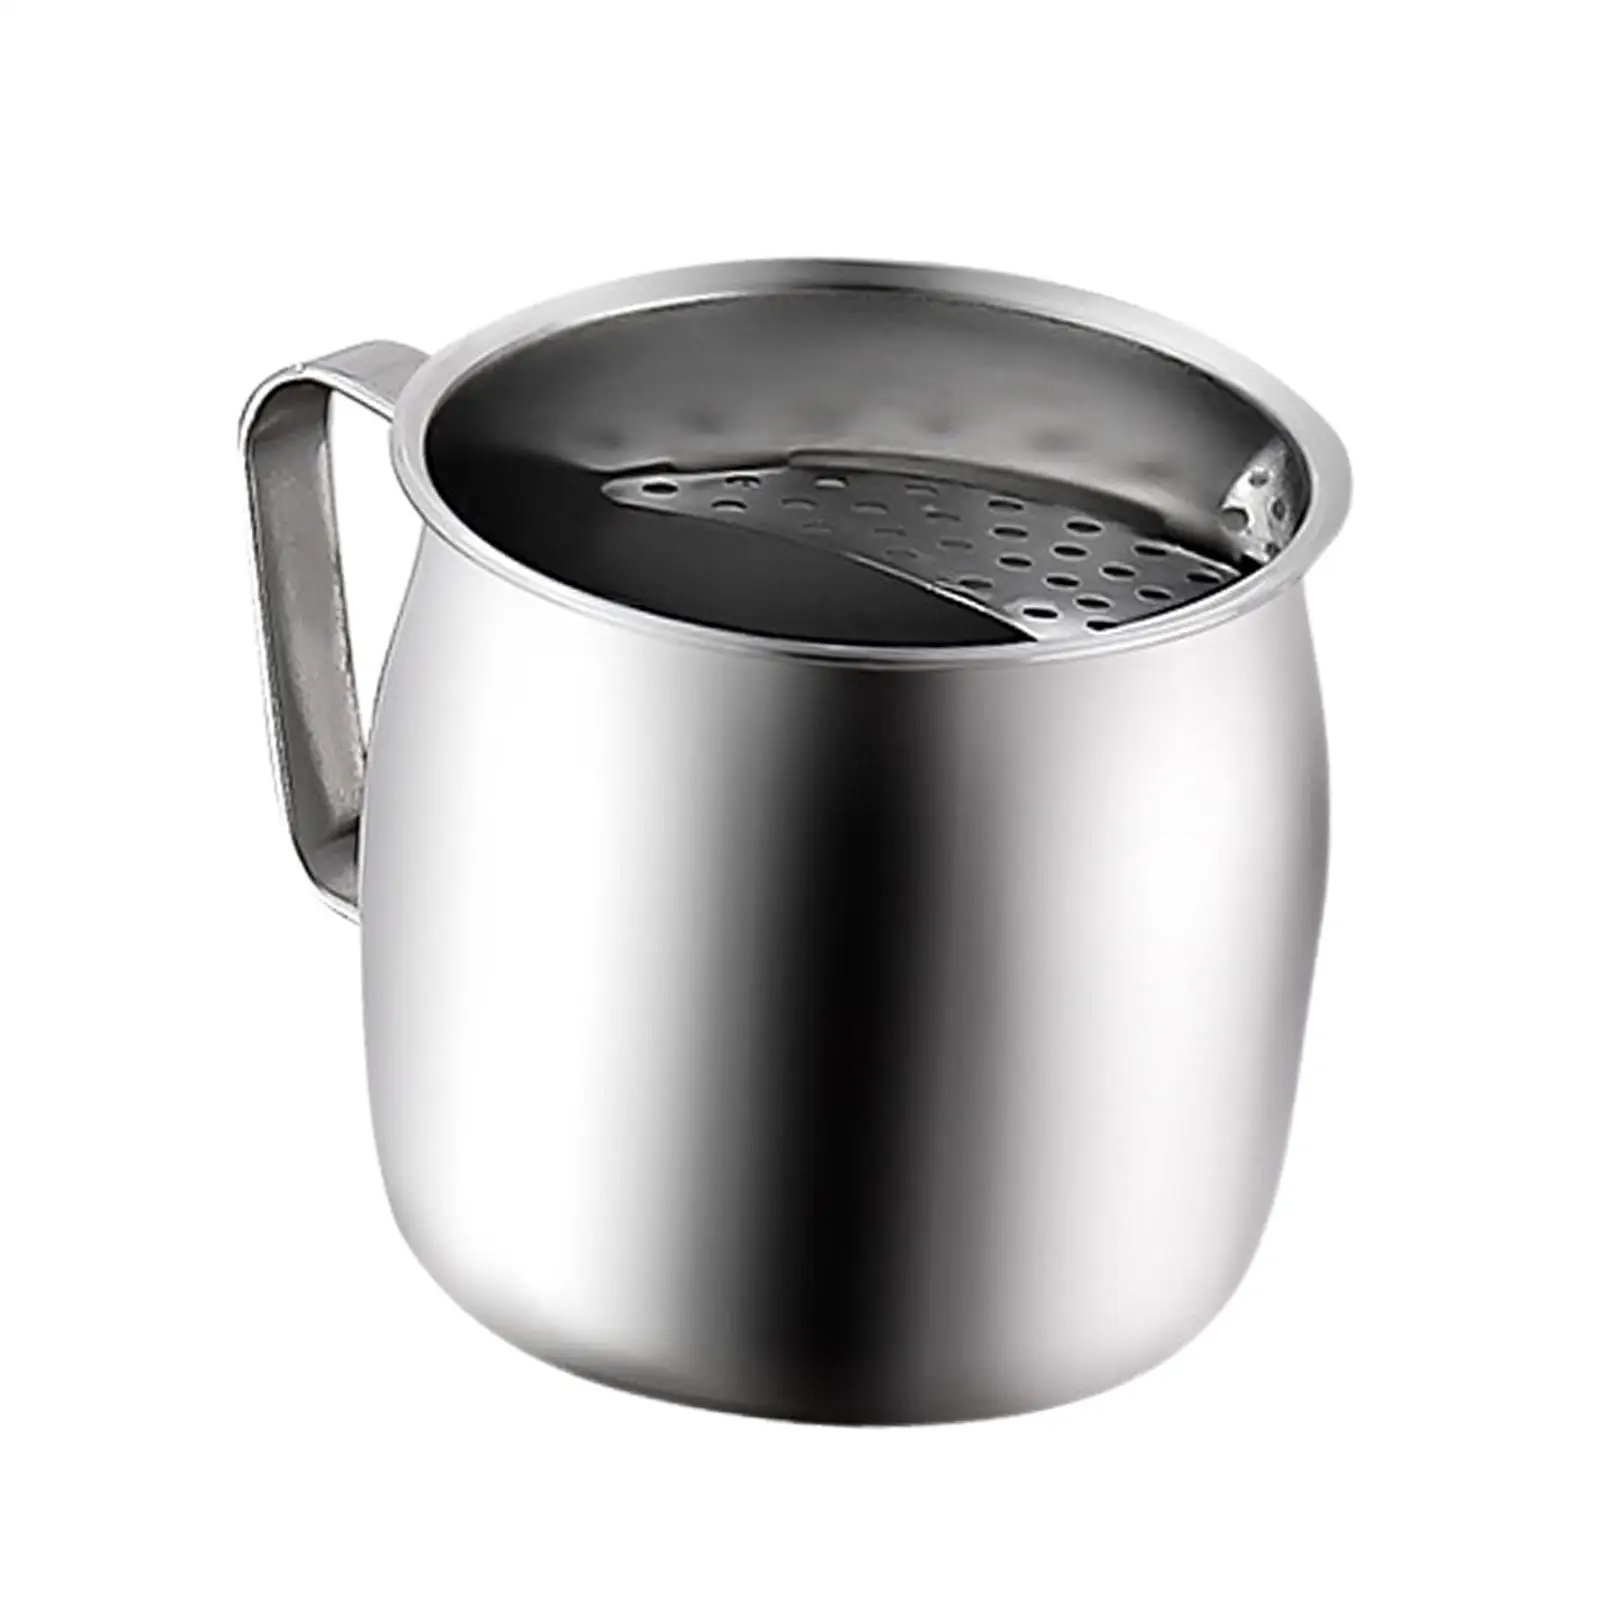 Stainless Steel Tea Cup Multi Use Tea Steeping Creative Drinking Cup for Daily Use